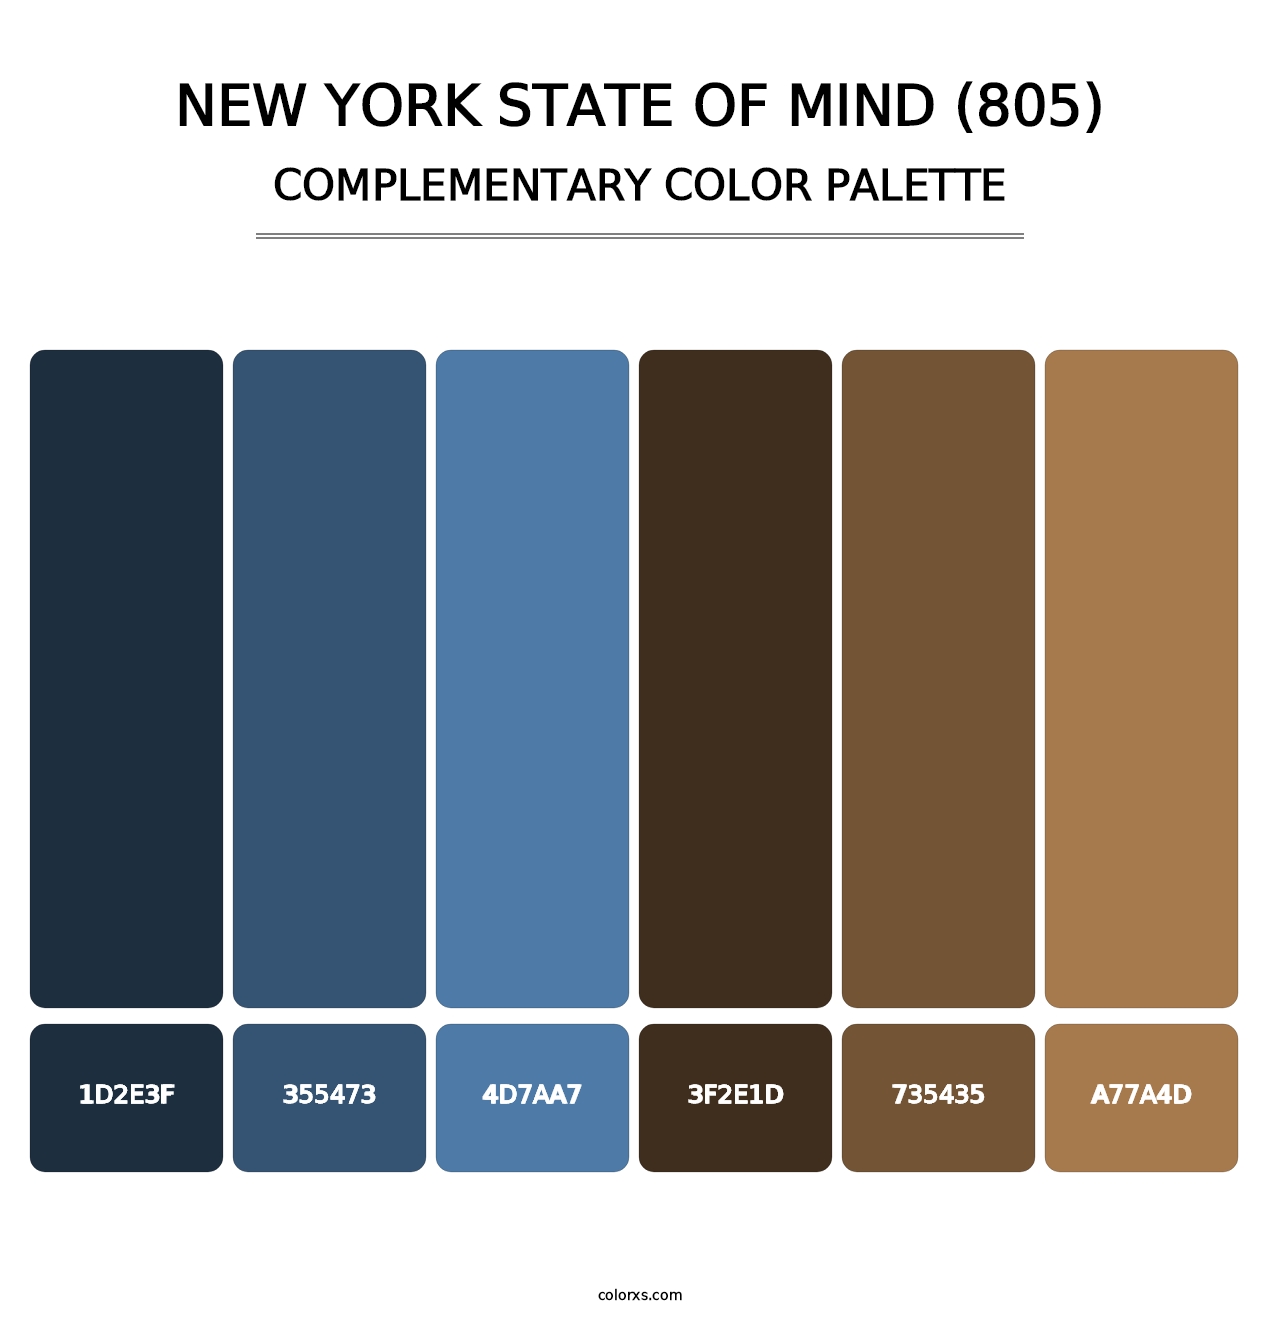 New York State of Mind (805) - Complementary Color Palette